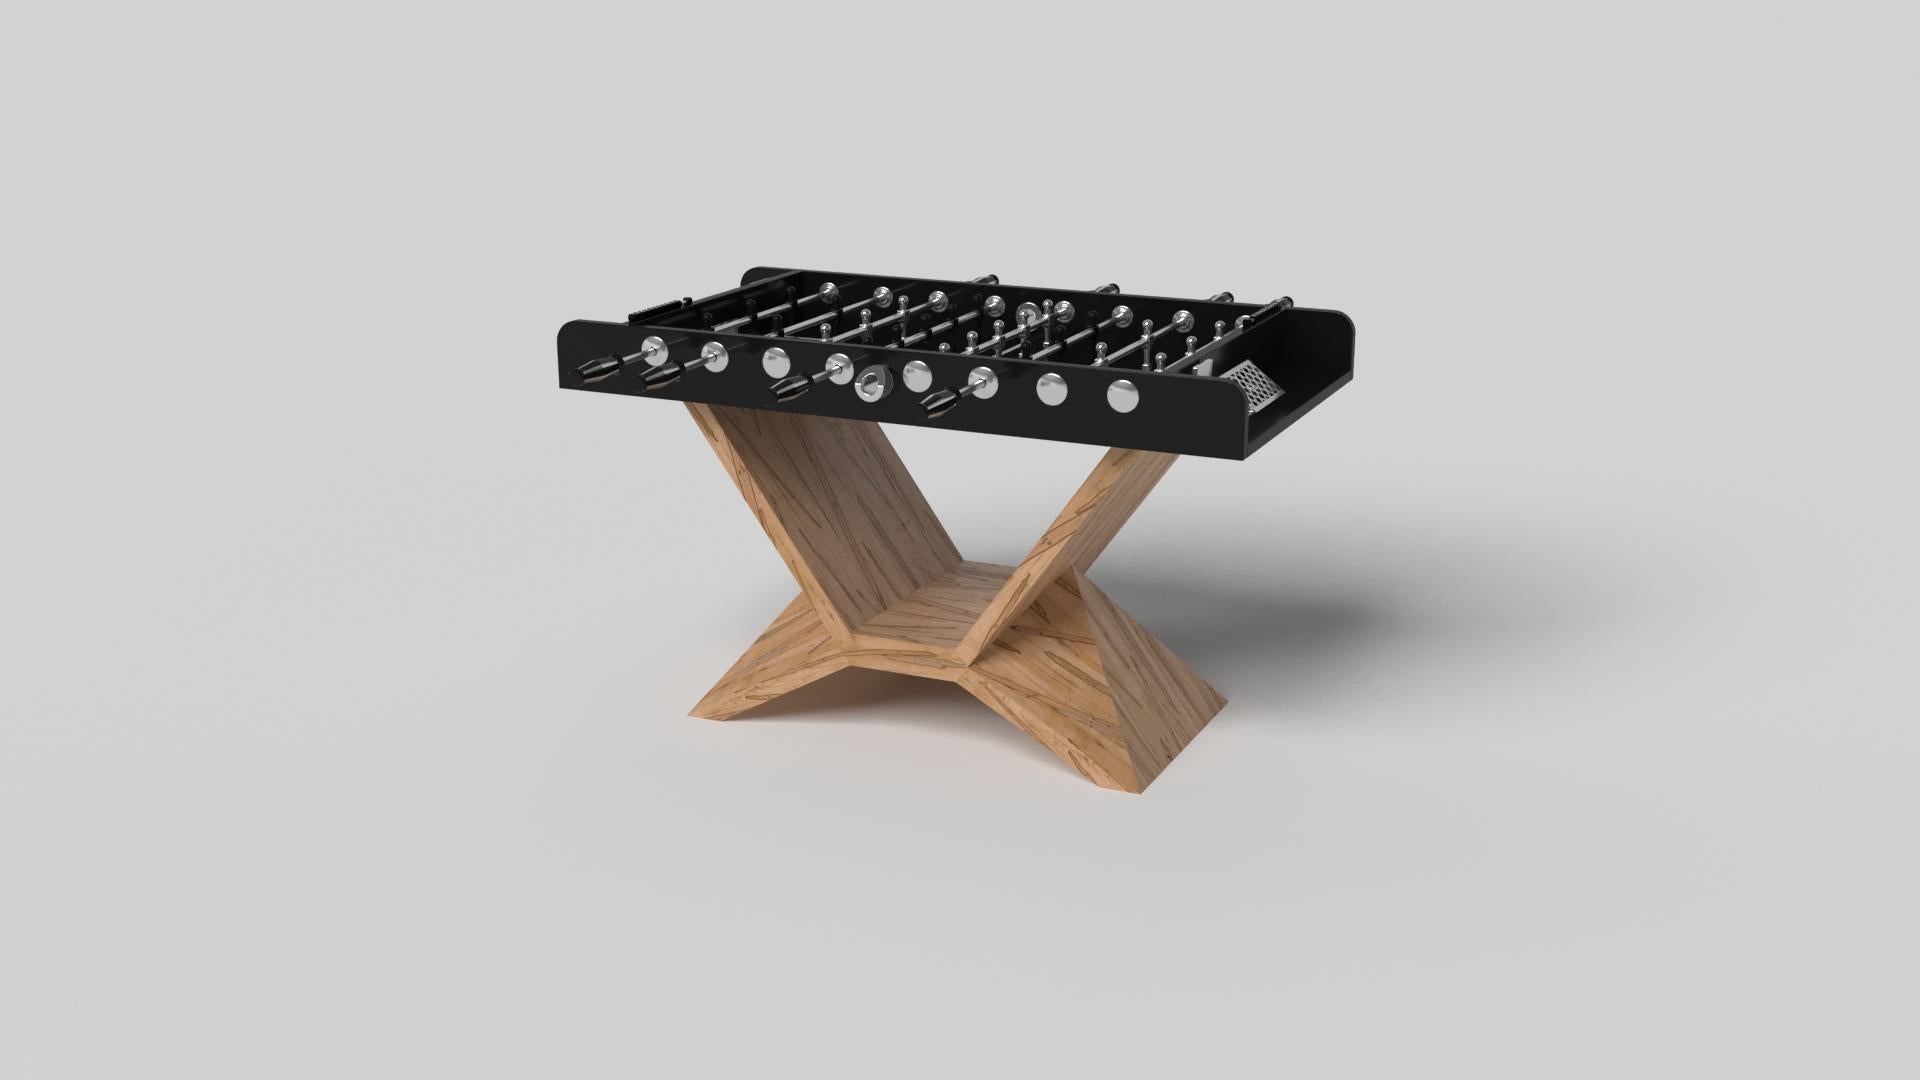 In chrome, the Kors foosball table is a superior example of contrasting geometric forms. This table features an angular base that highlights the beauty of negative space from the front view. From the side view, it offers a completely different